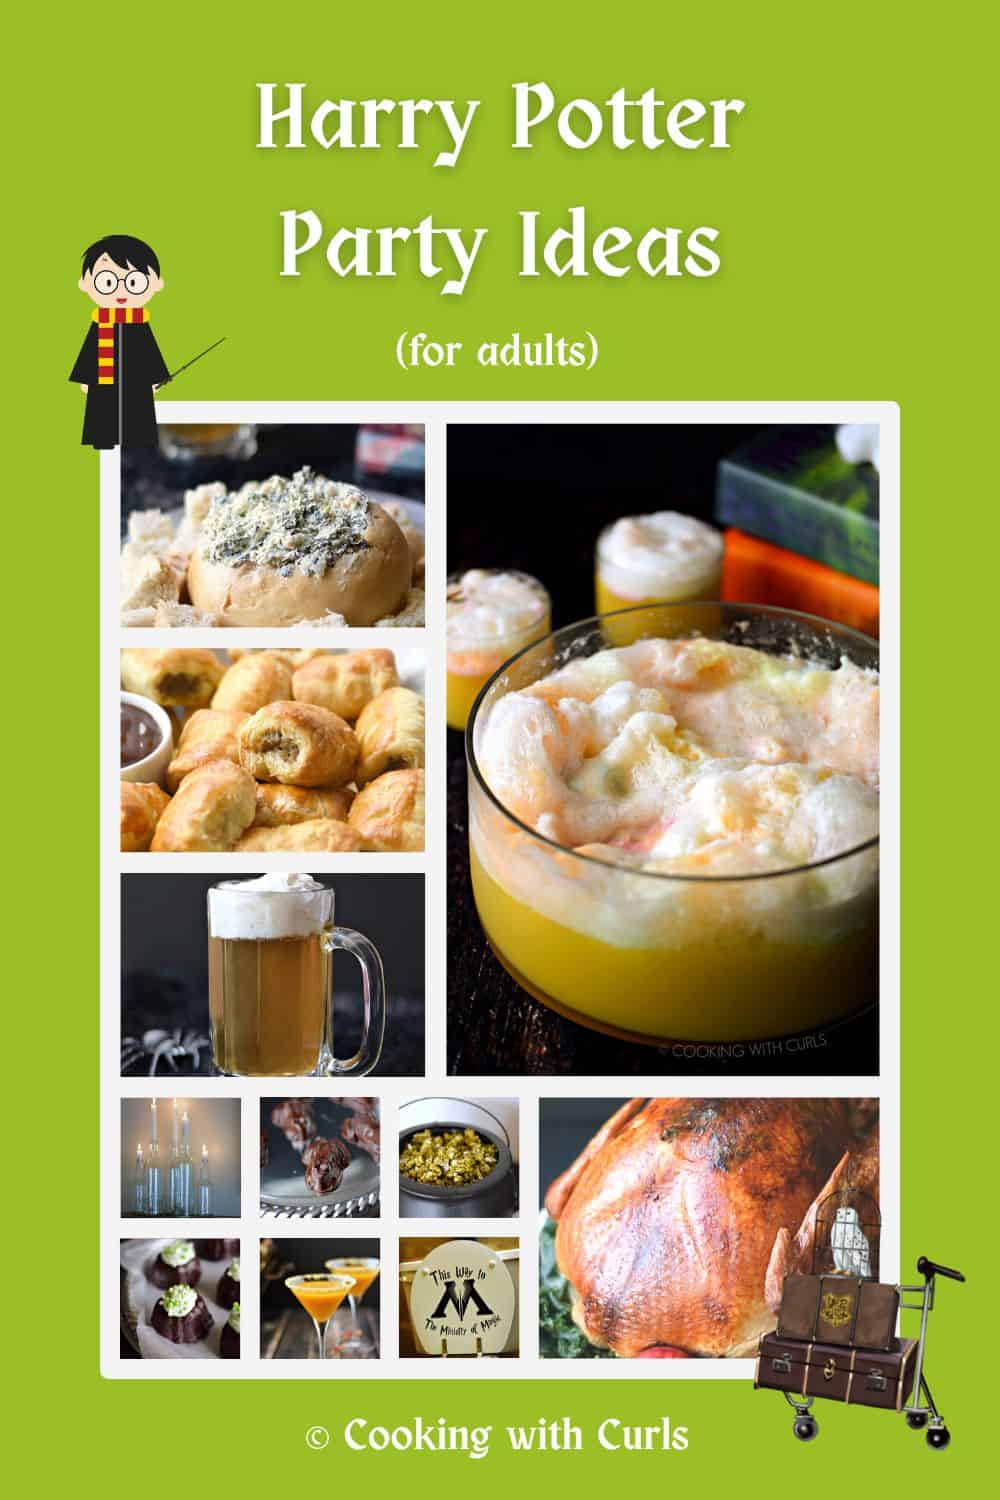 Harry Potter Party Ideas for Adults collage with eleven images. 